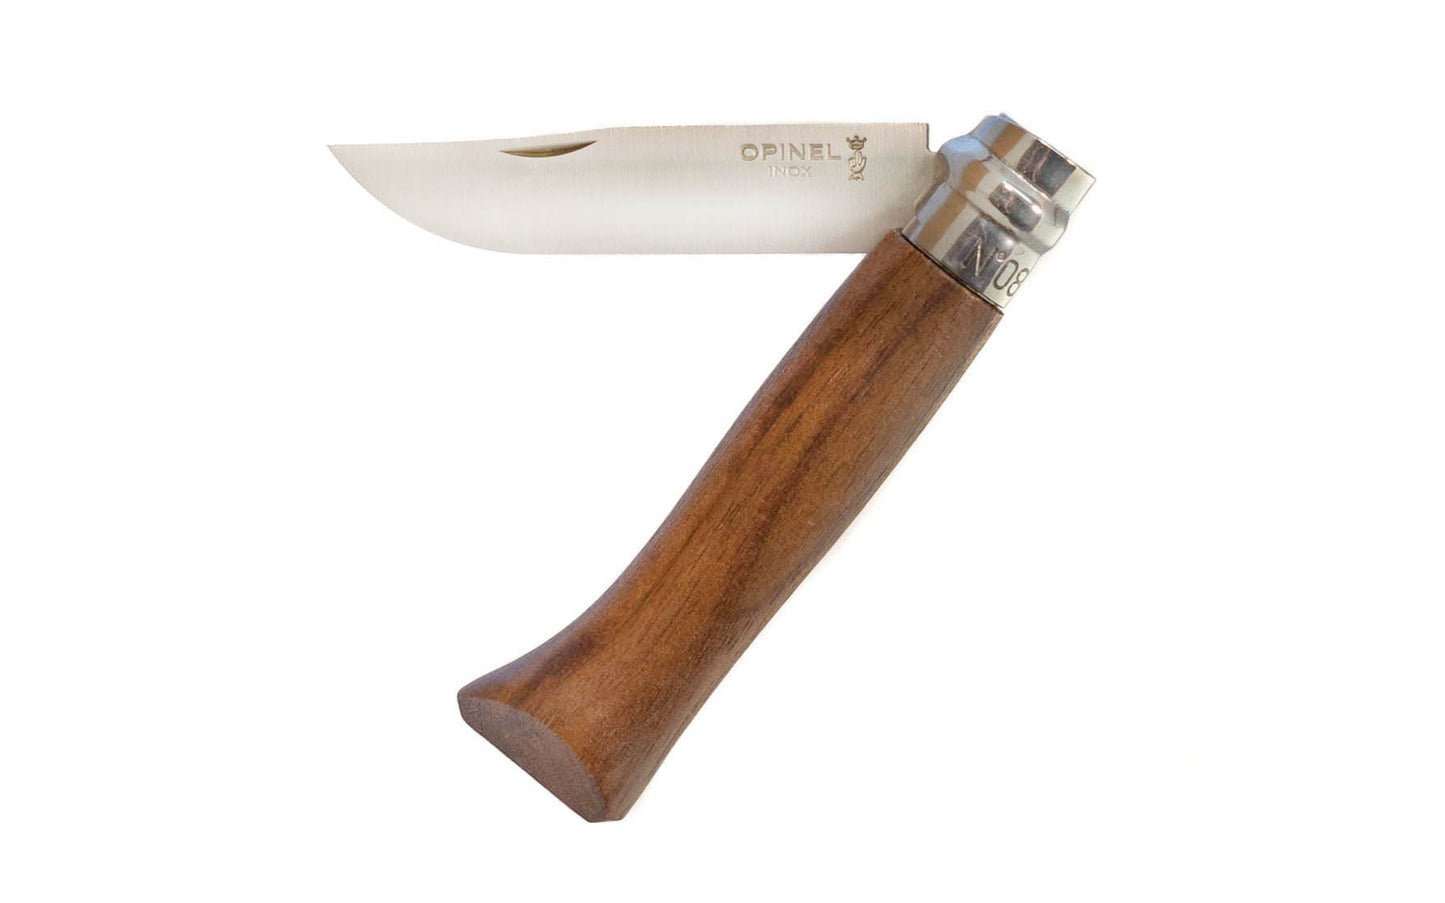 Opinel Stainless Steel Knife ~ Walnut Handle ~ Foldable Blade ~ Opinel Stainless Steel Knife ~ Walnut Handle ~ Made in France ~ Foldable blade with stainless locking collar~ Made of 12c27 Sandvik stainless steel ~Special walnut wood handle ~ Includes "gift" paper sleeve